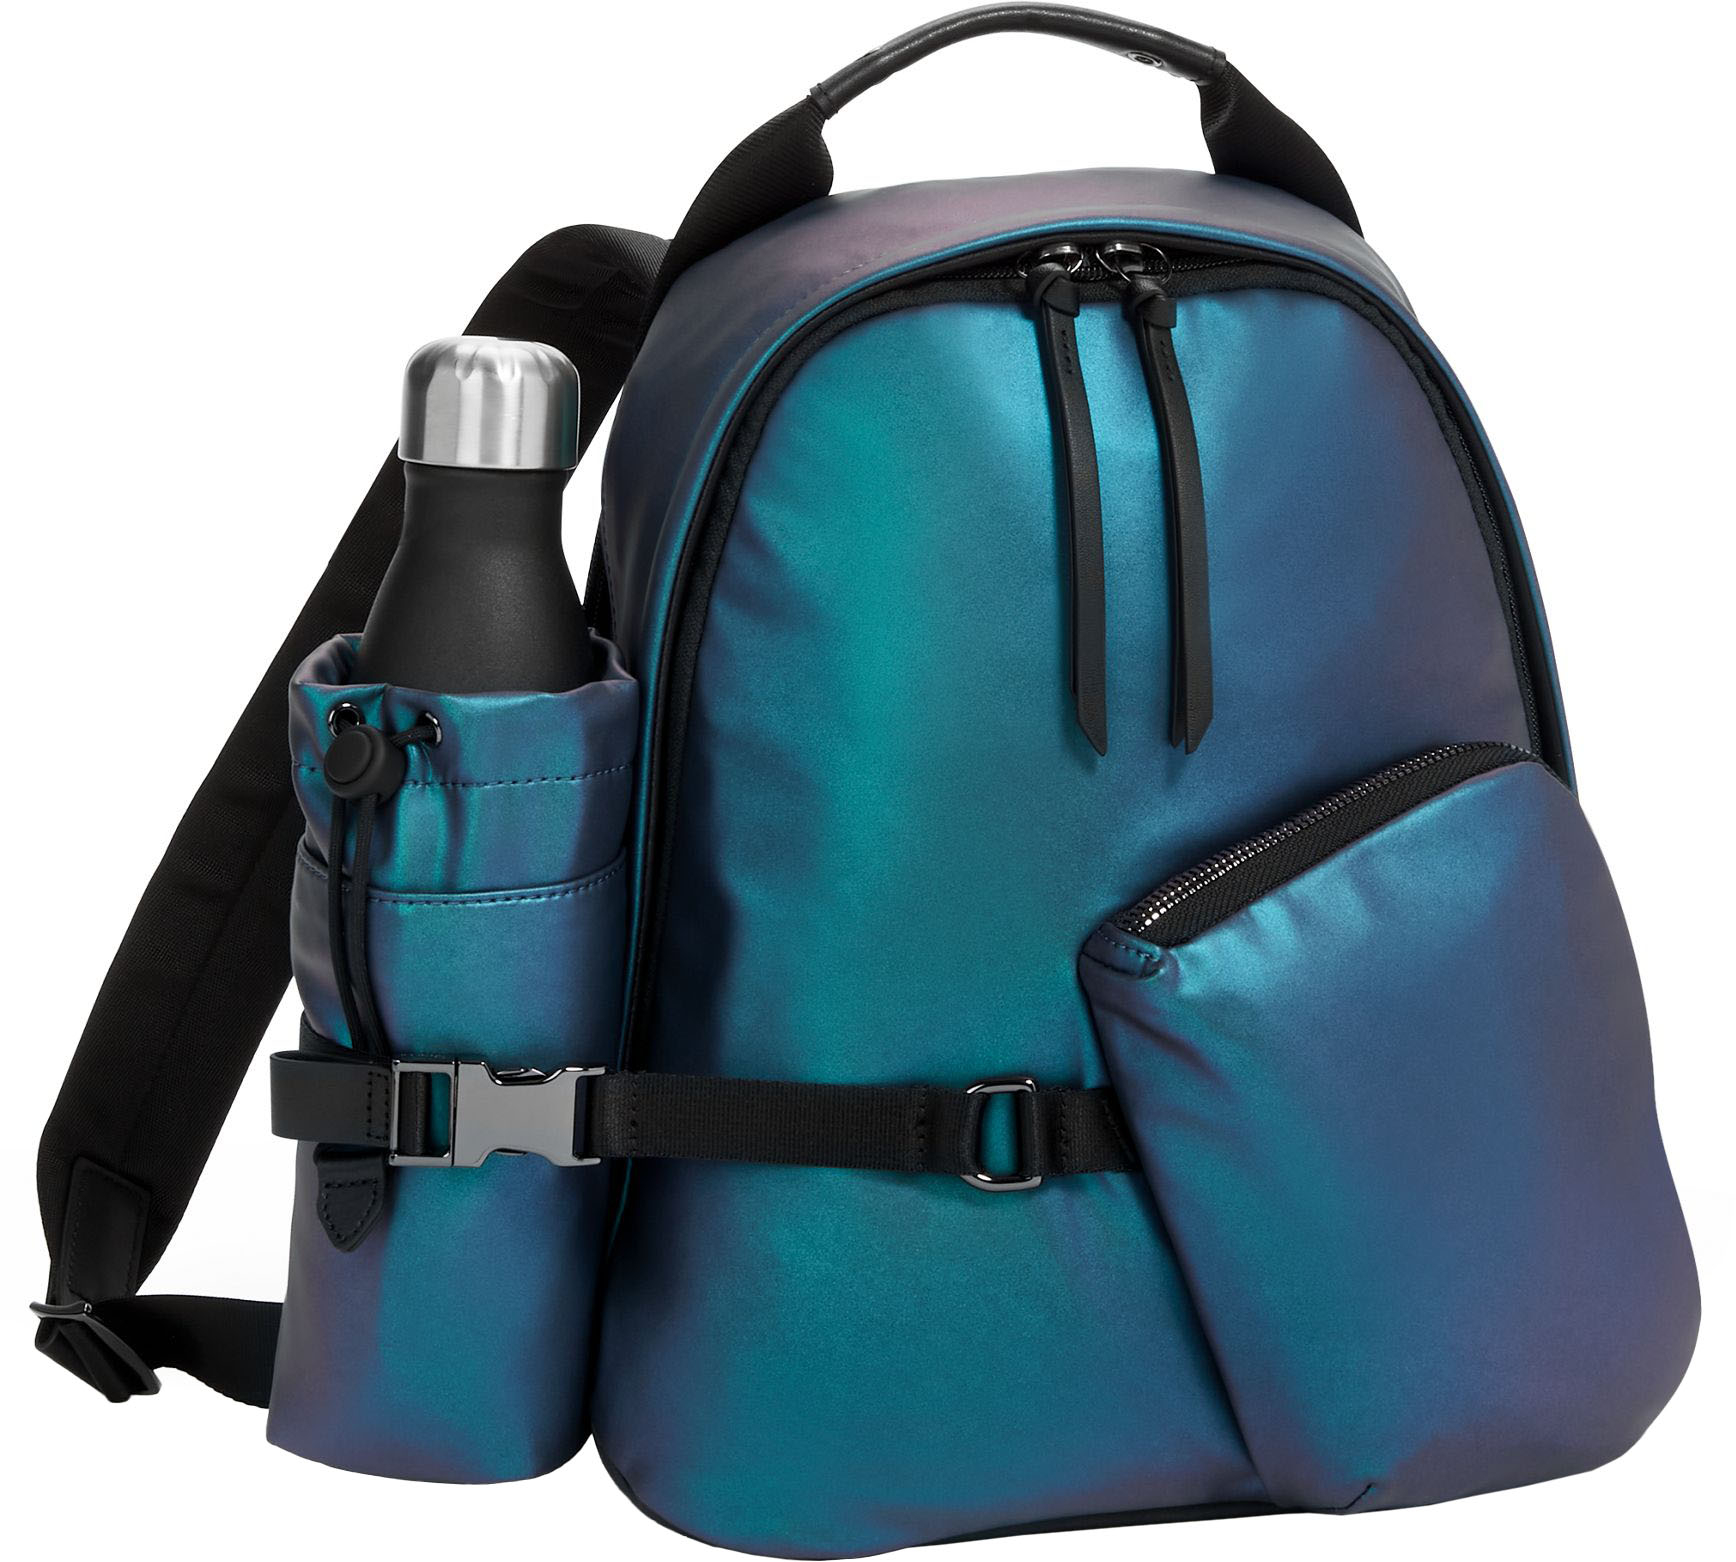 Angle View: TUMI - Devoe Sterling Backpack - Blue